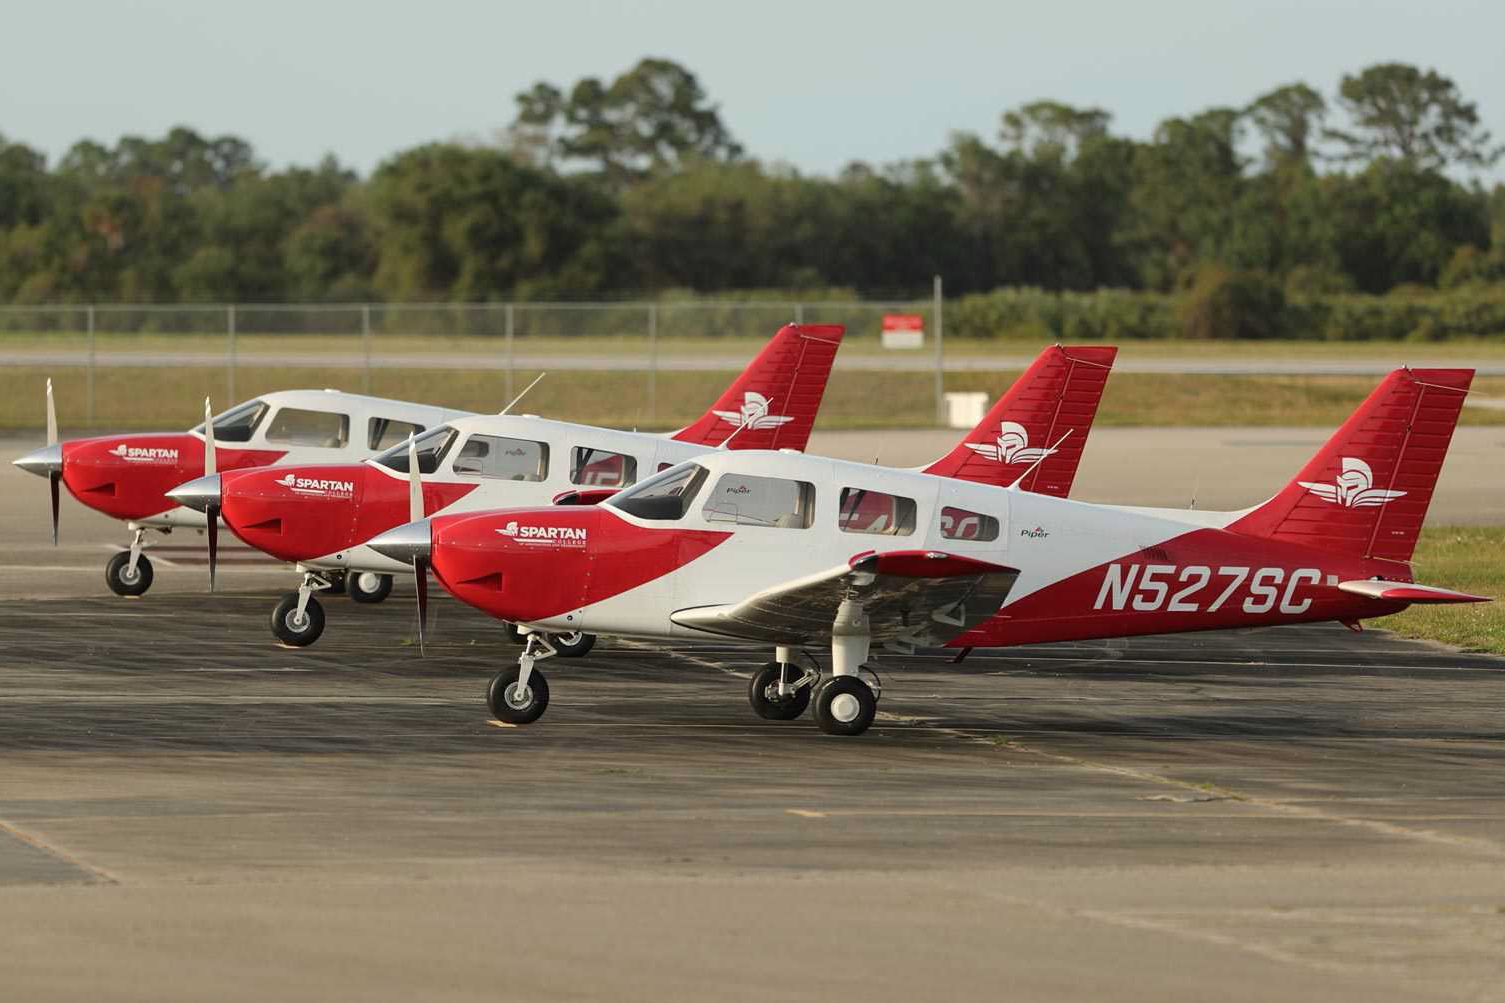 Planes used for pilot training at Spartan College of Aeronautics and Technology. Click to enlarge.